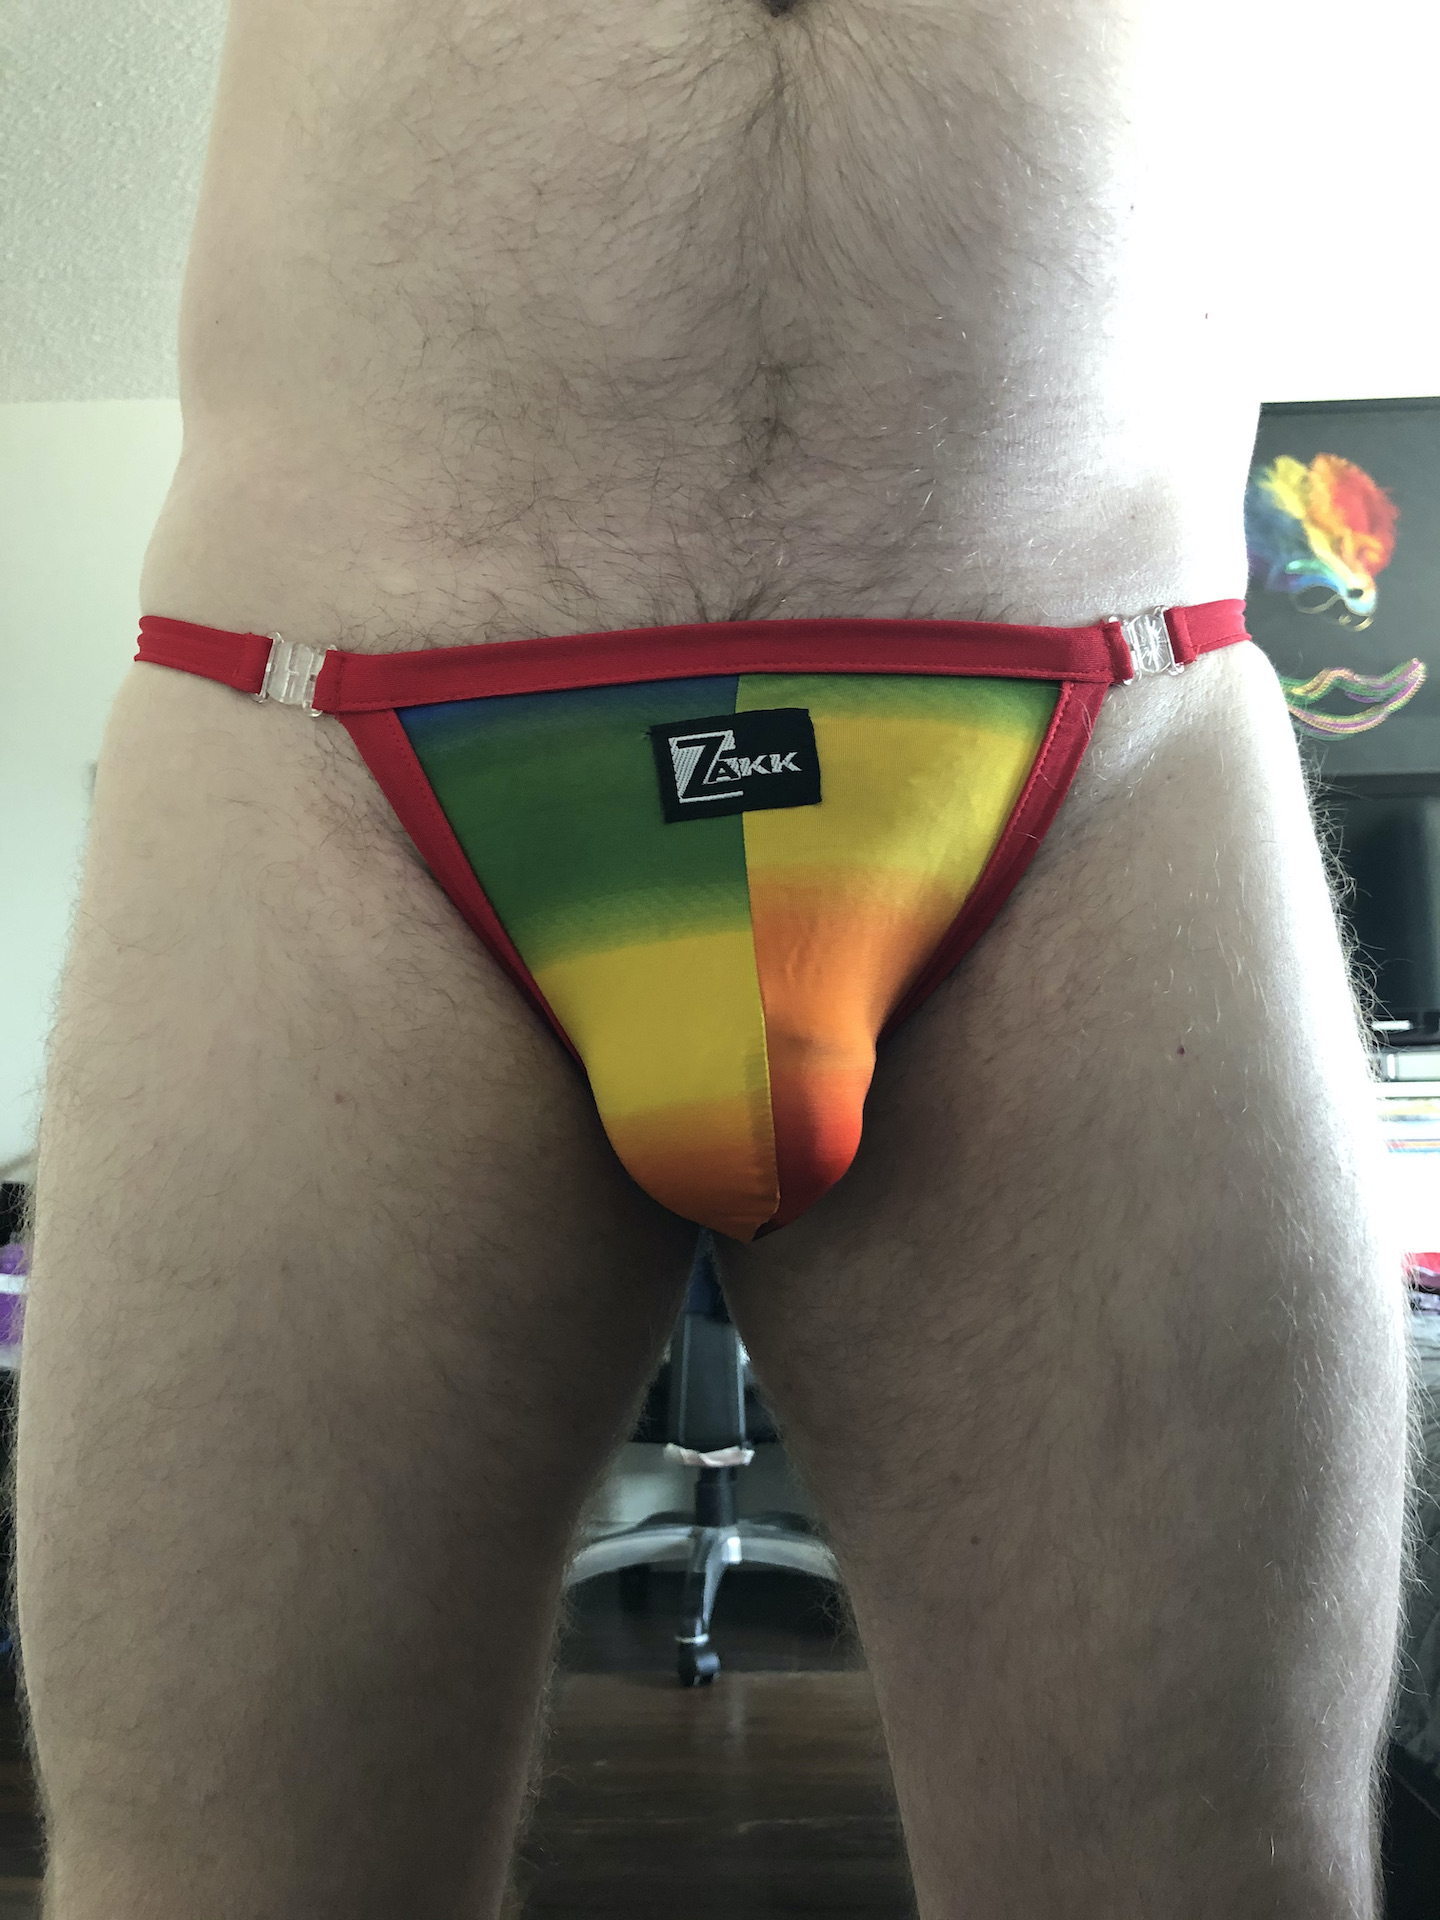 Easy Access…a bright thong with clips you say?